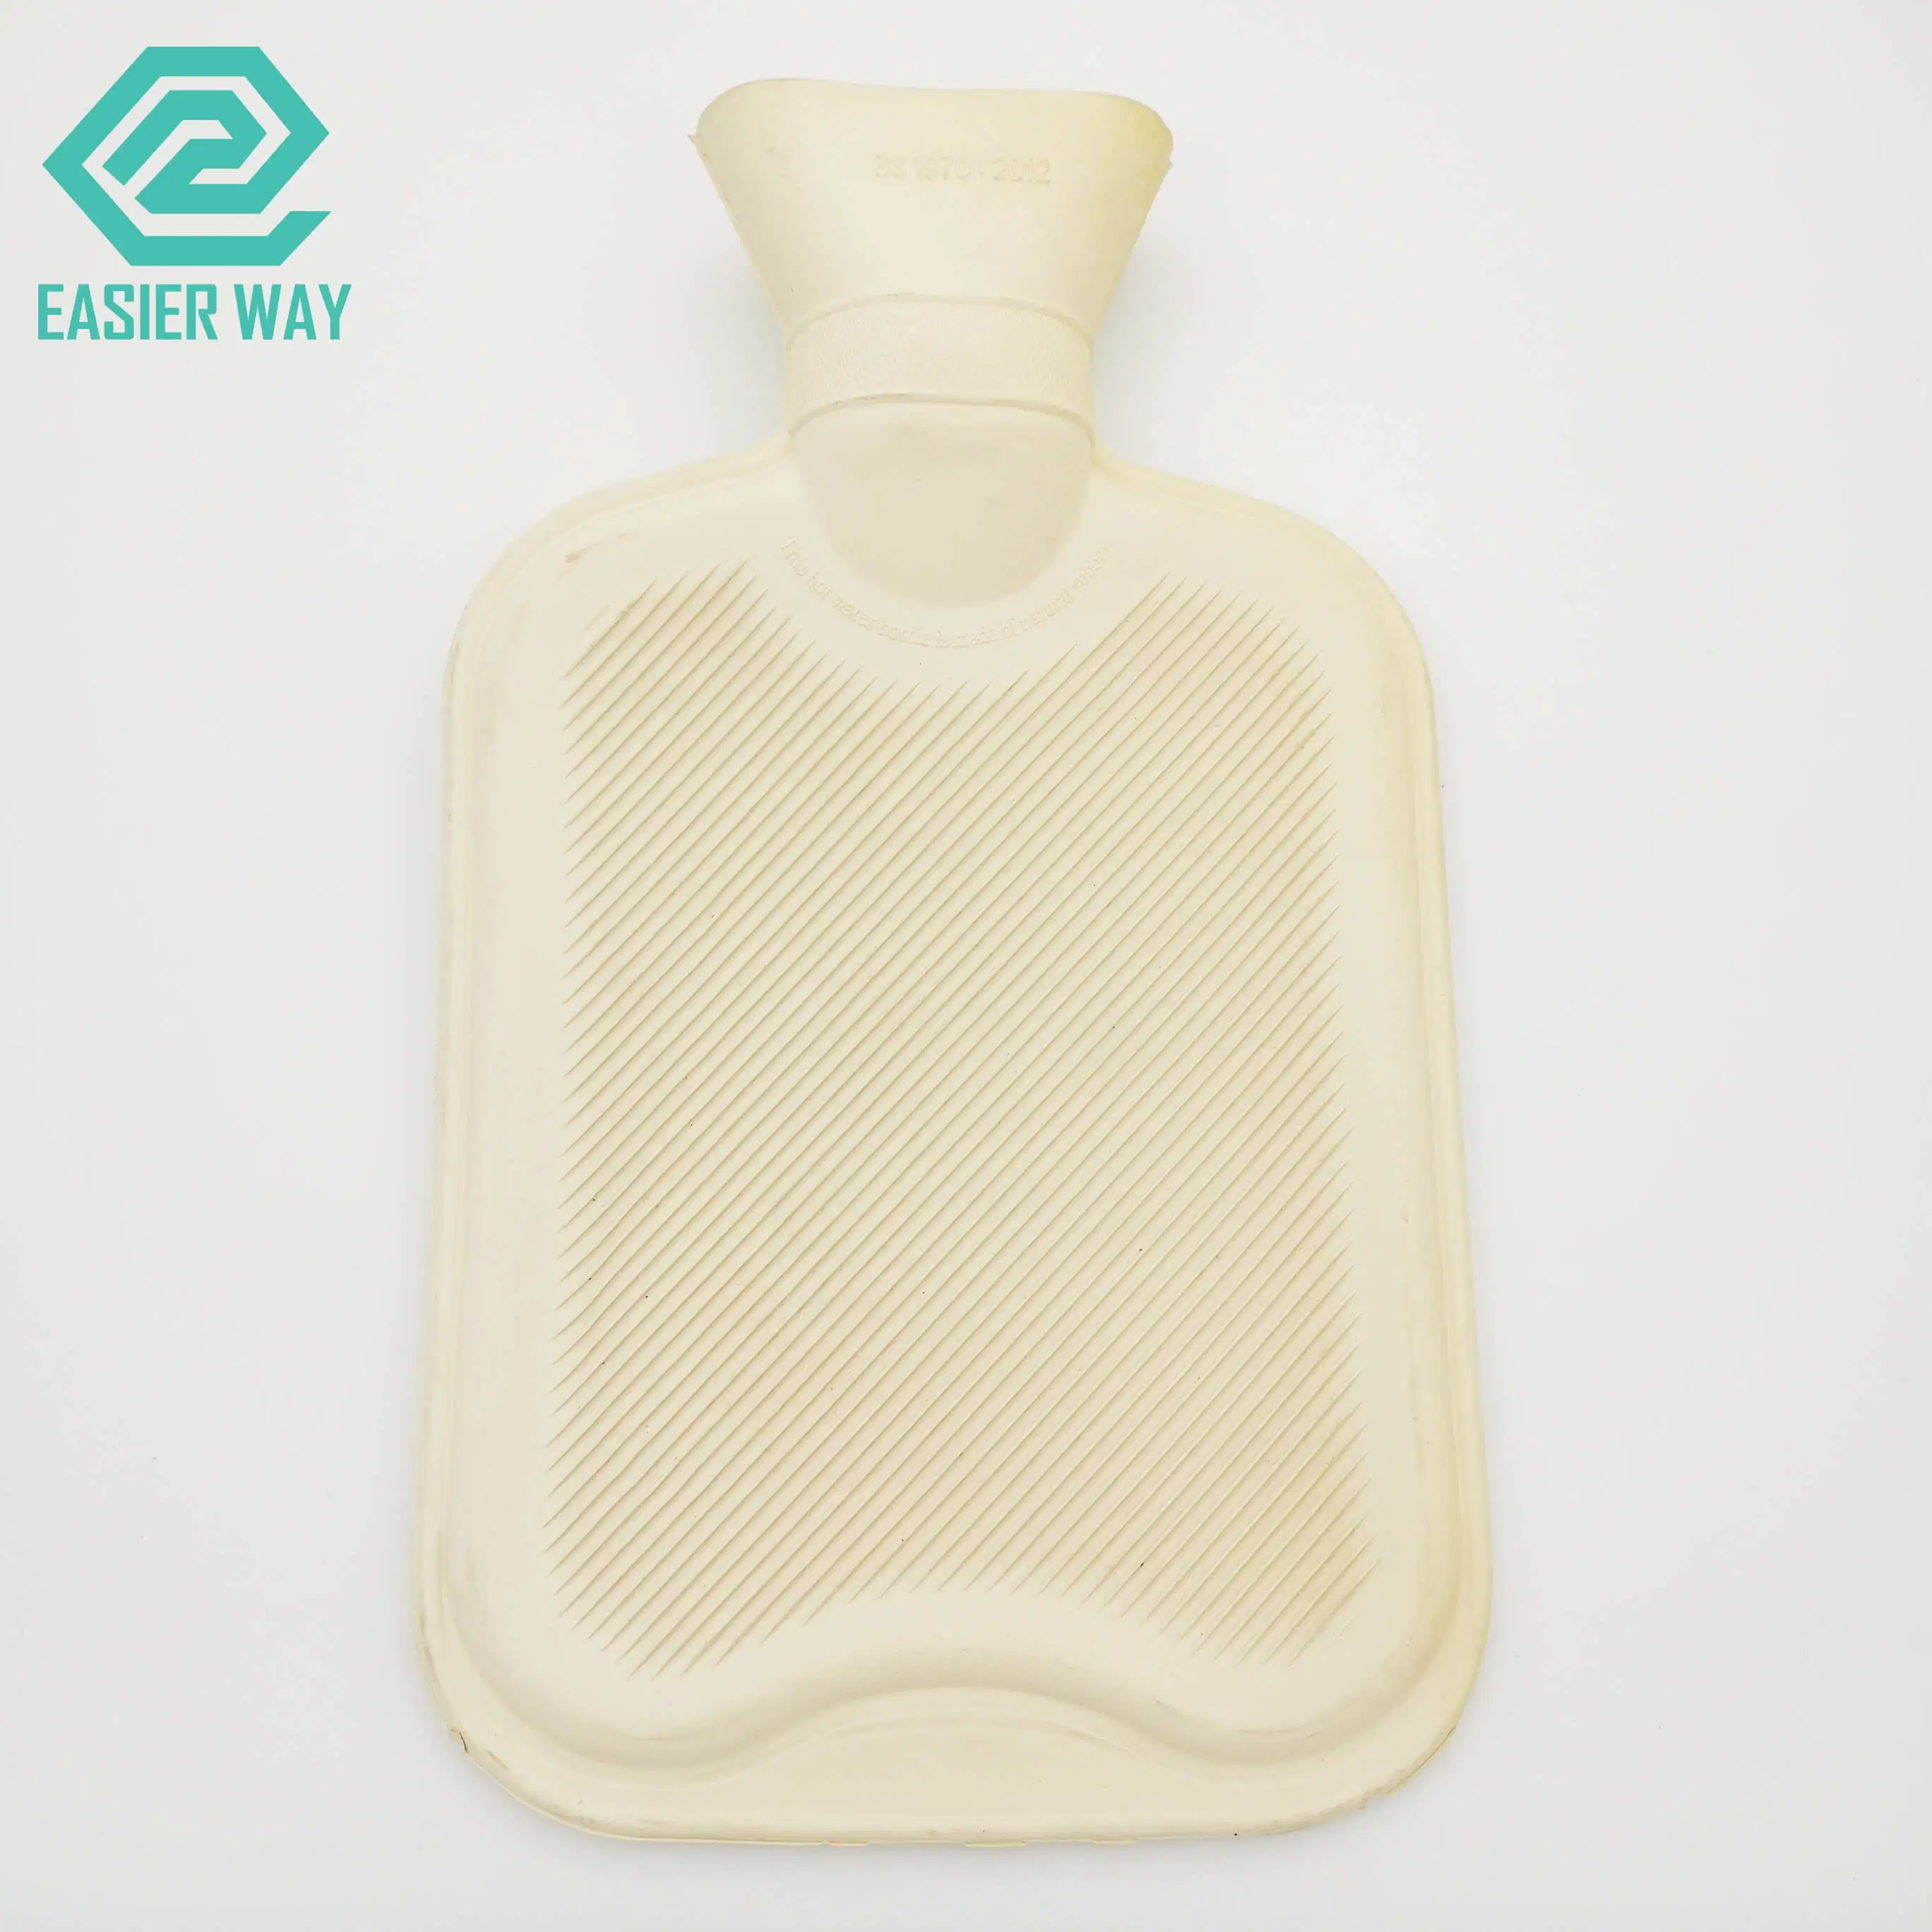 1L 2L Hot Water Bottle Bag with Super Soft Cover